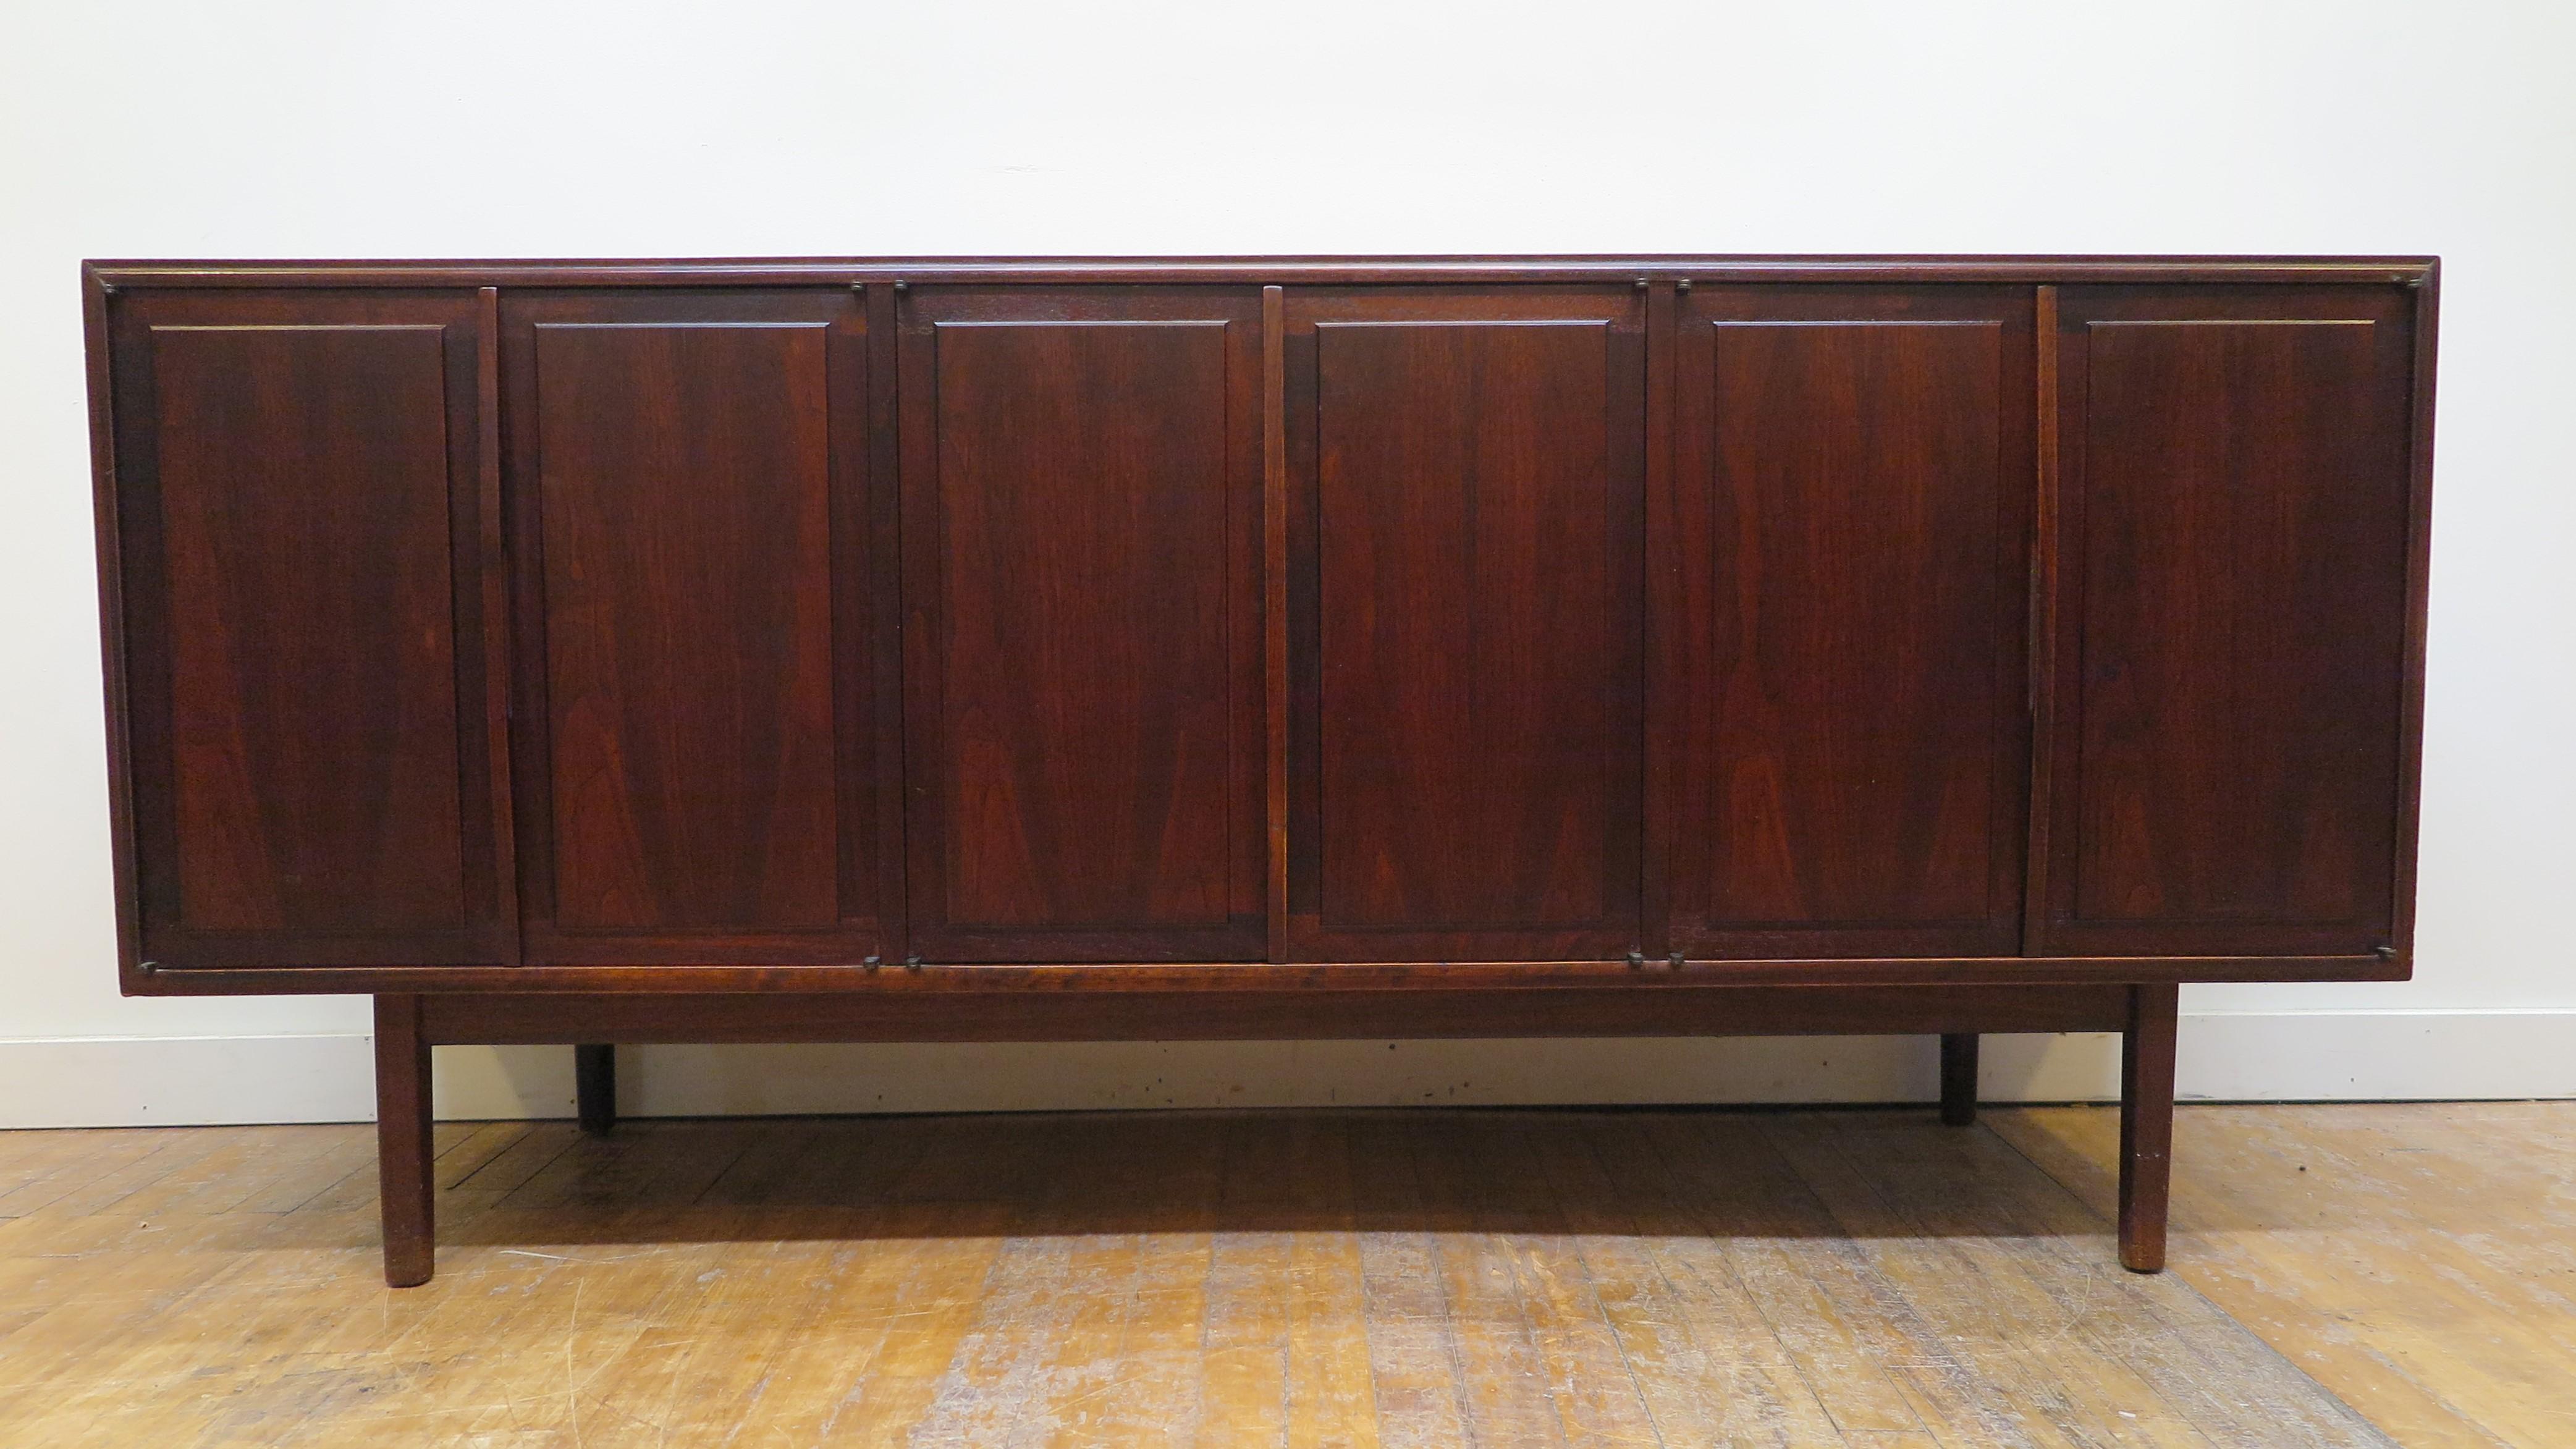 American Mid Century Modern Walnut credenza sideboard by Jack Cartwright for Founders 1962.  Having Three compartment cabinets with three drawers and three shelves. In good condition with a nice patina. The top has some fading and light wear nothing